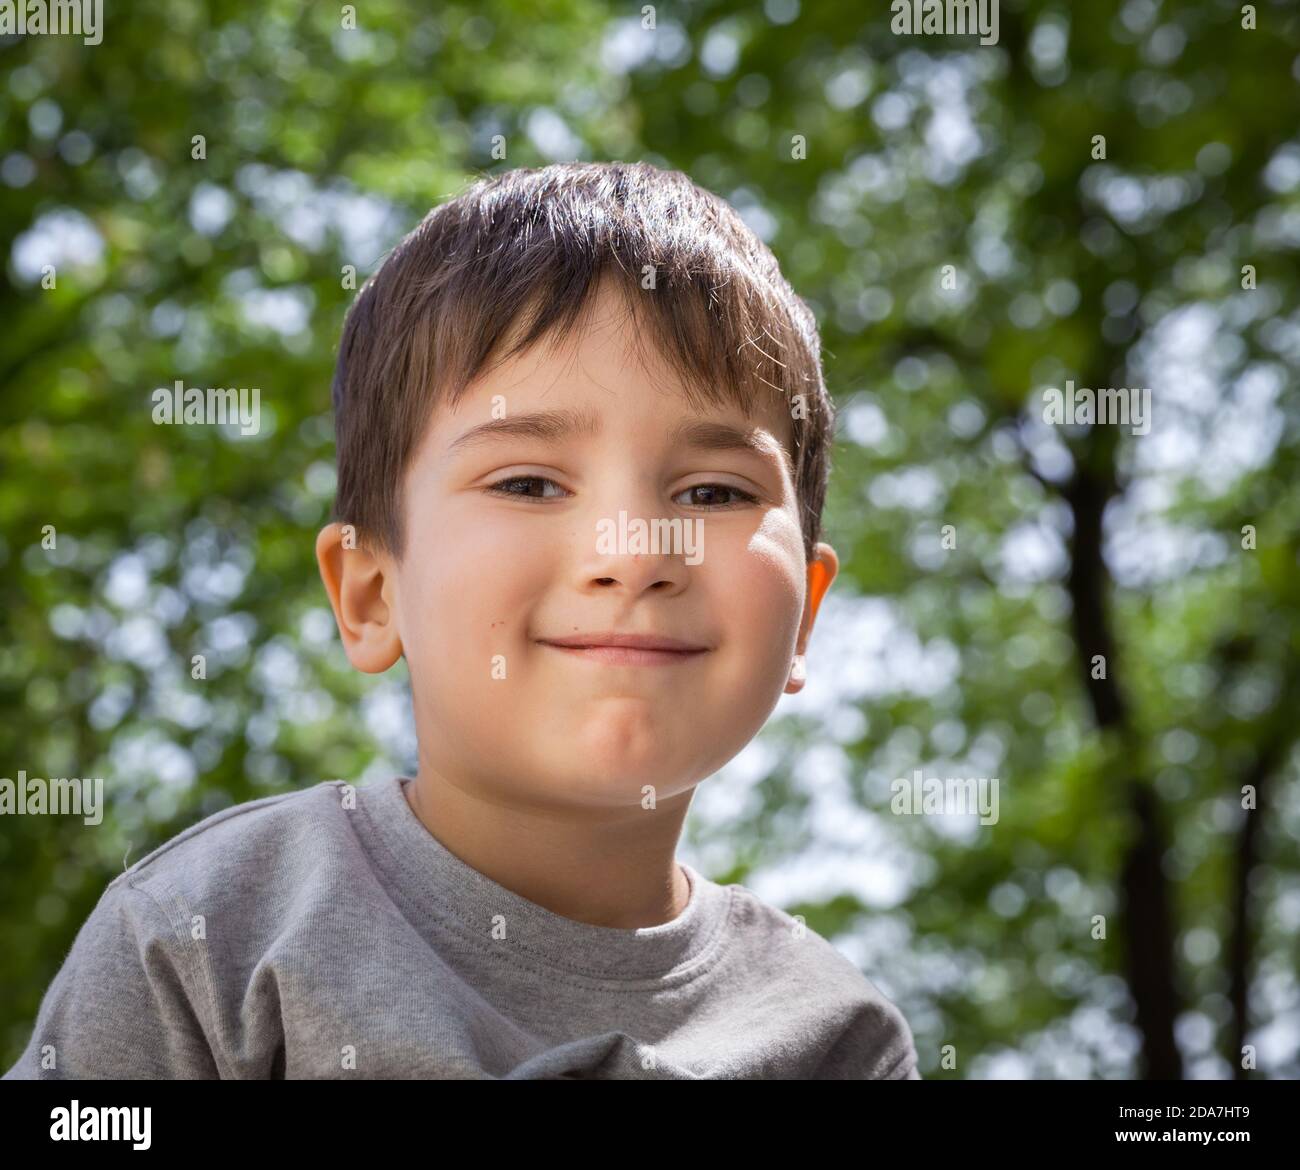 Happy little boy smiling on blurred background Stock Photo - Alamy